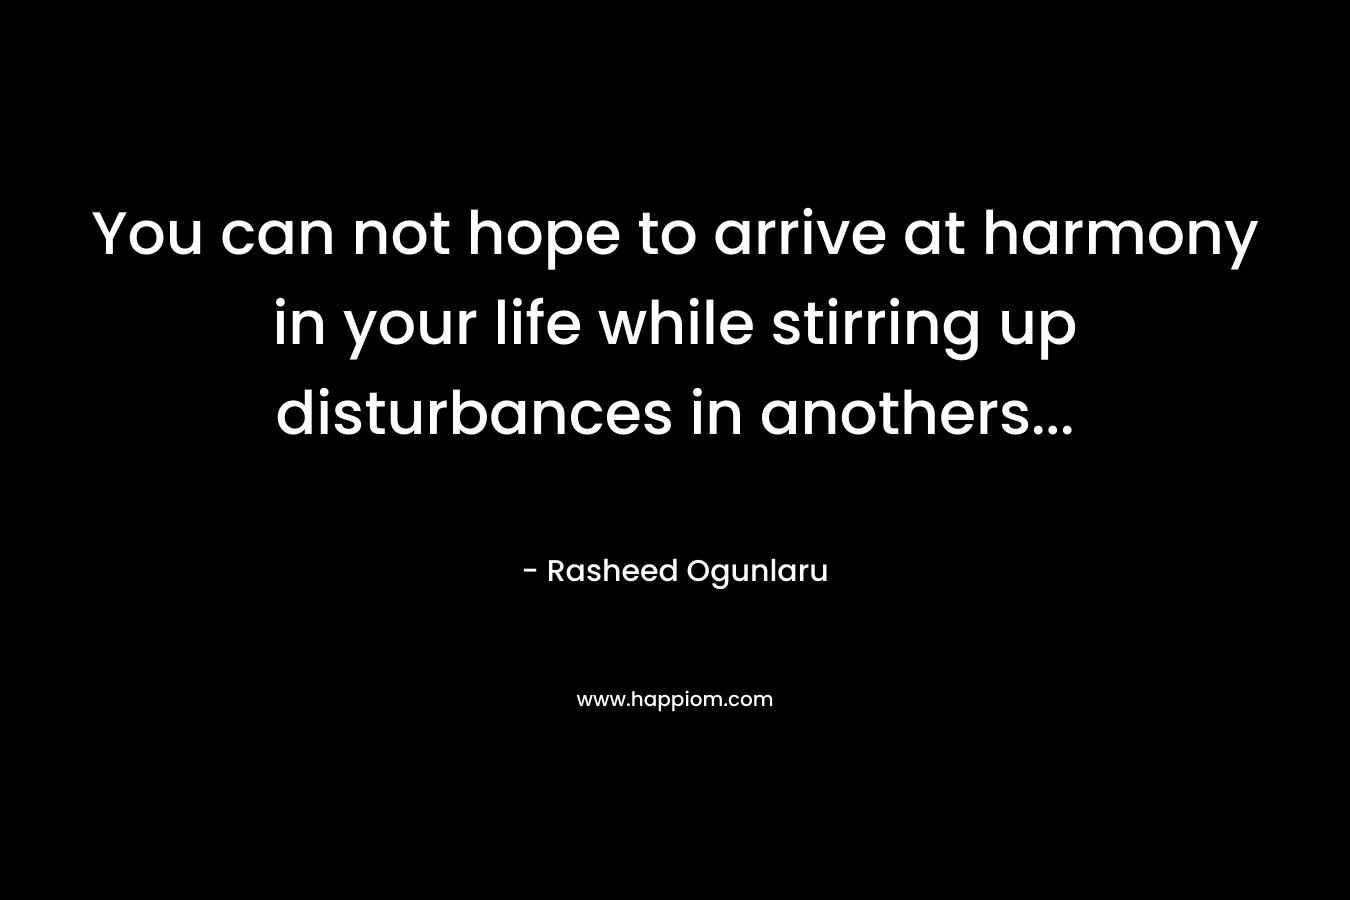 You can not hope to arrive at harmony in your life while stirring up disturbances in anothers… – Rasheed Ogunlaru